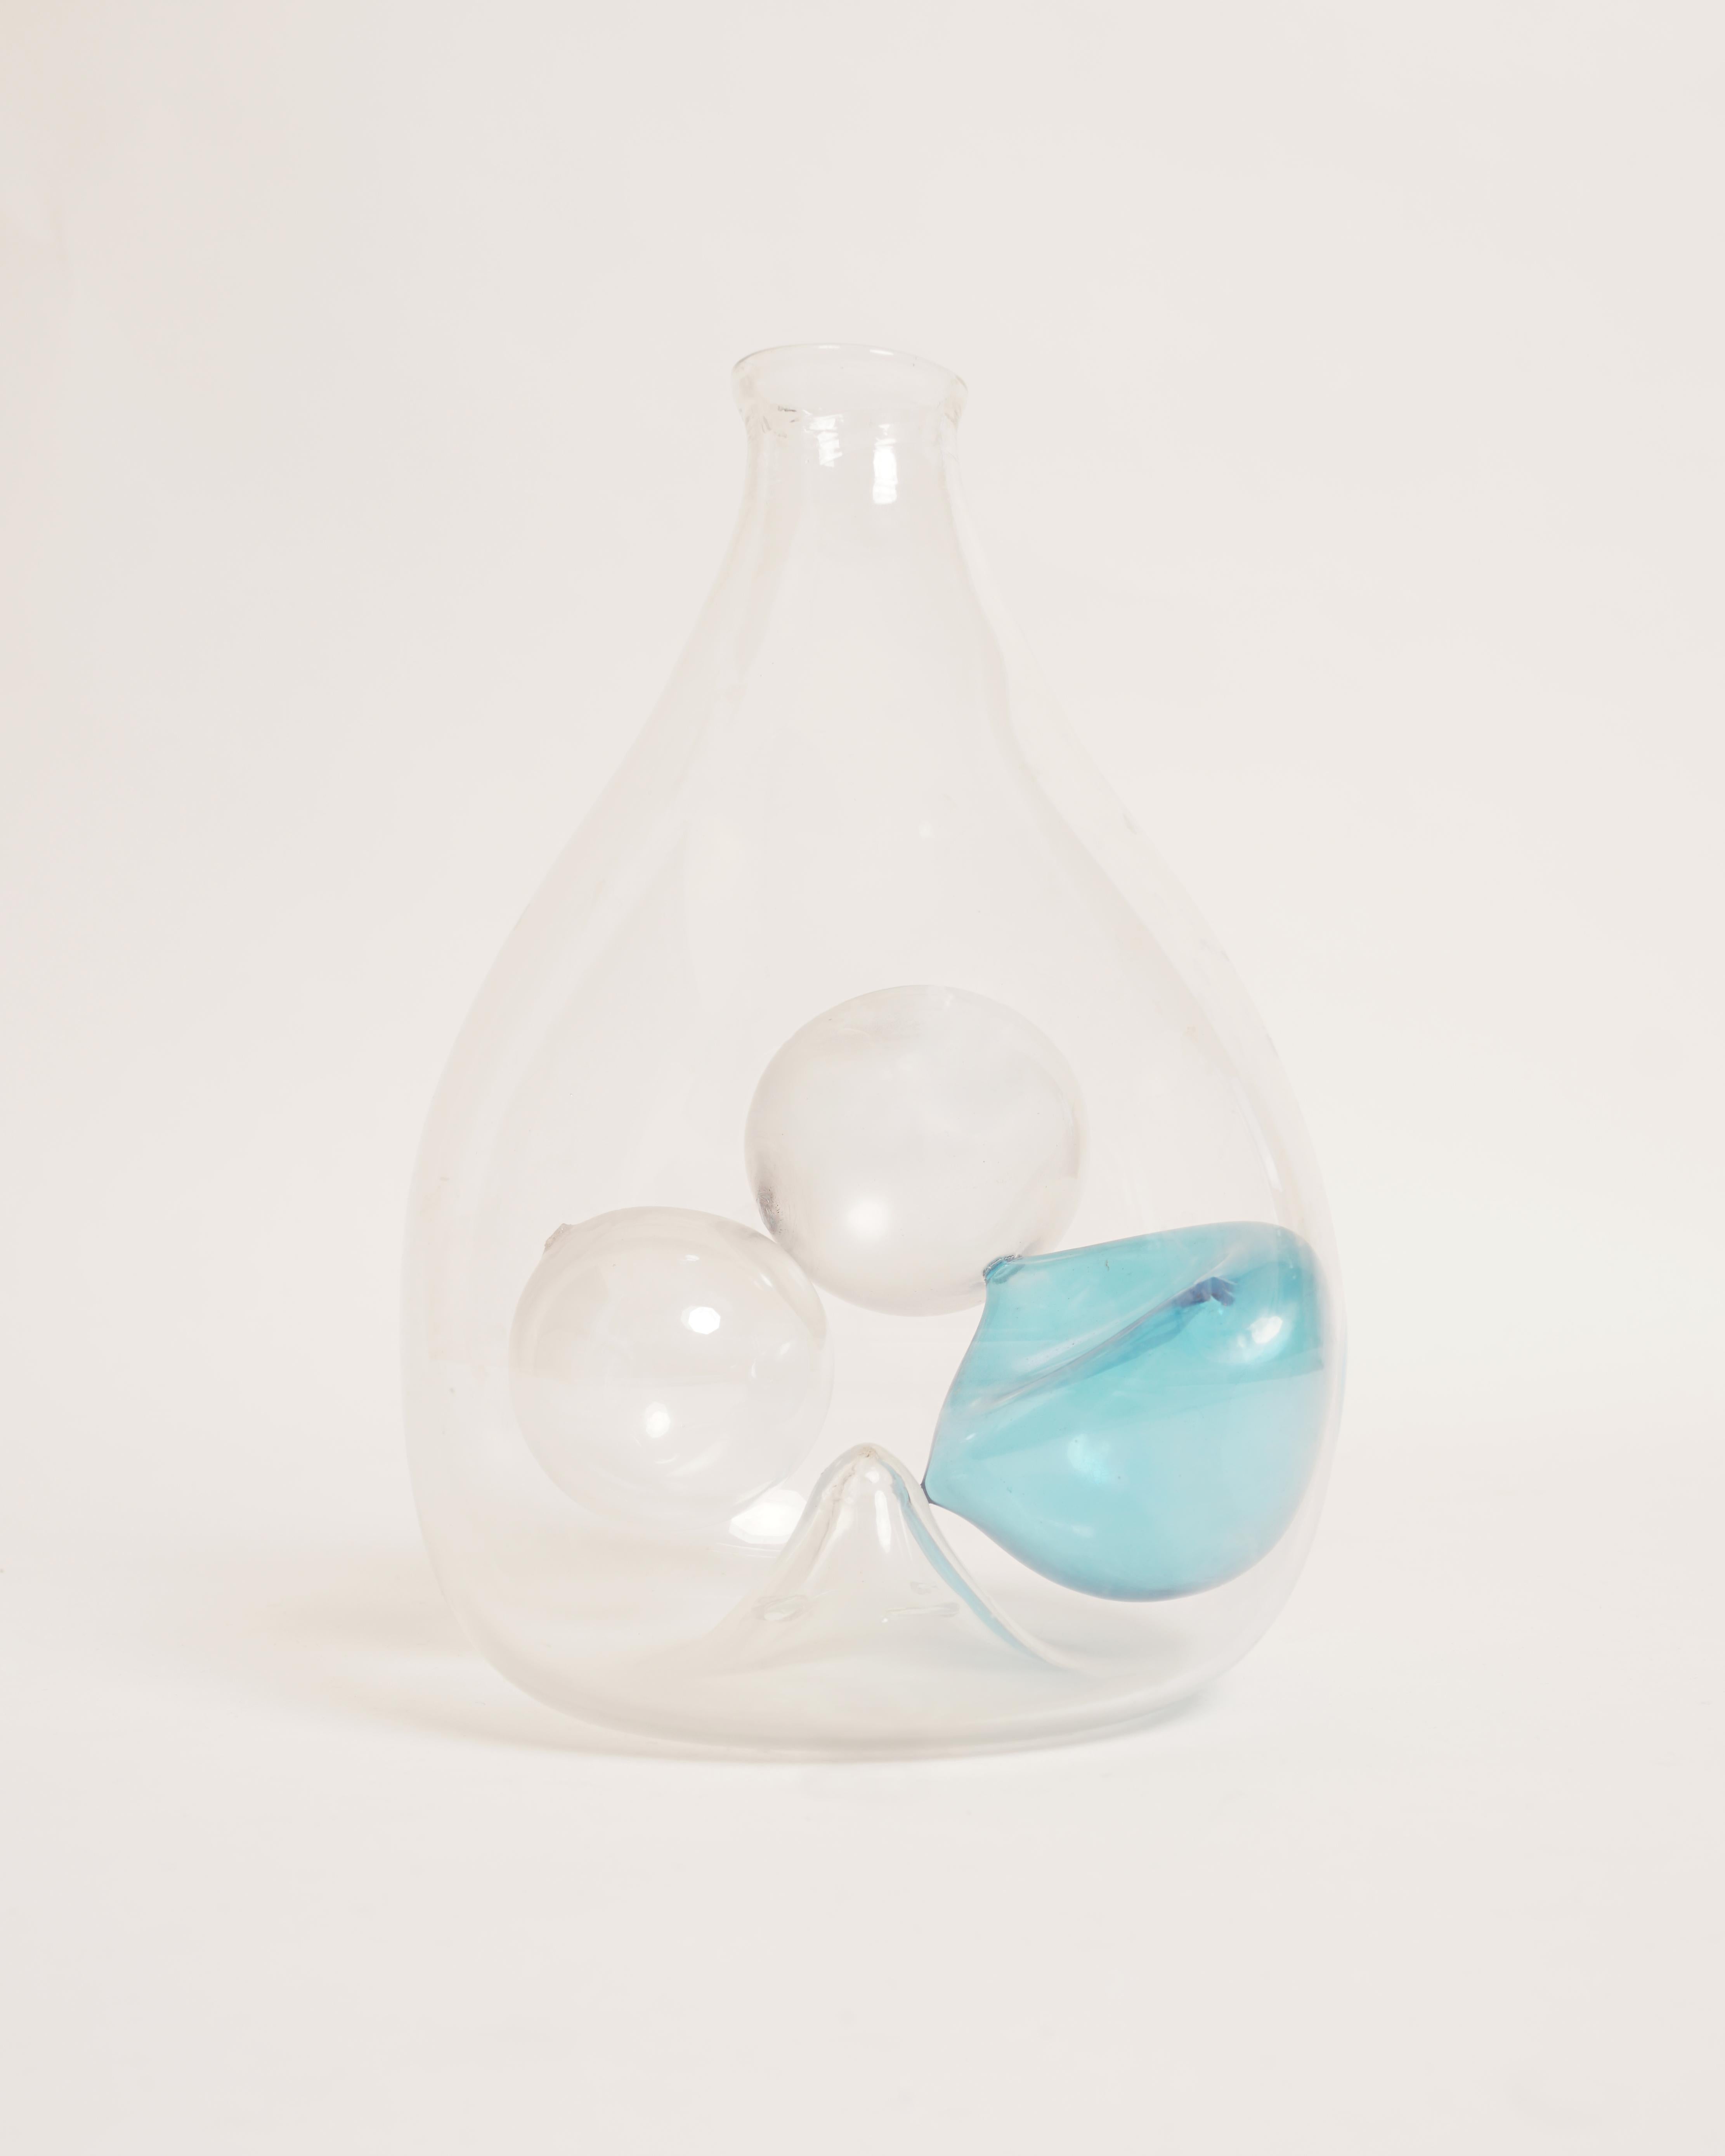 Fulvio Bianconi
Bianconi's private collection, c. 1960
Execution: Blown glass, clear and blue, with glass bubbles inside.
Signed: Bianconi
H : 23 cm (9.05